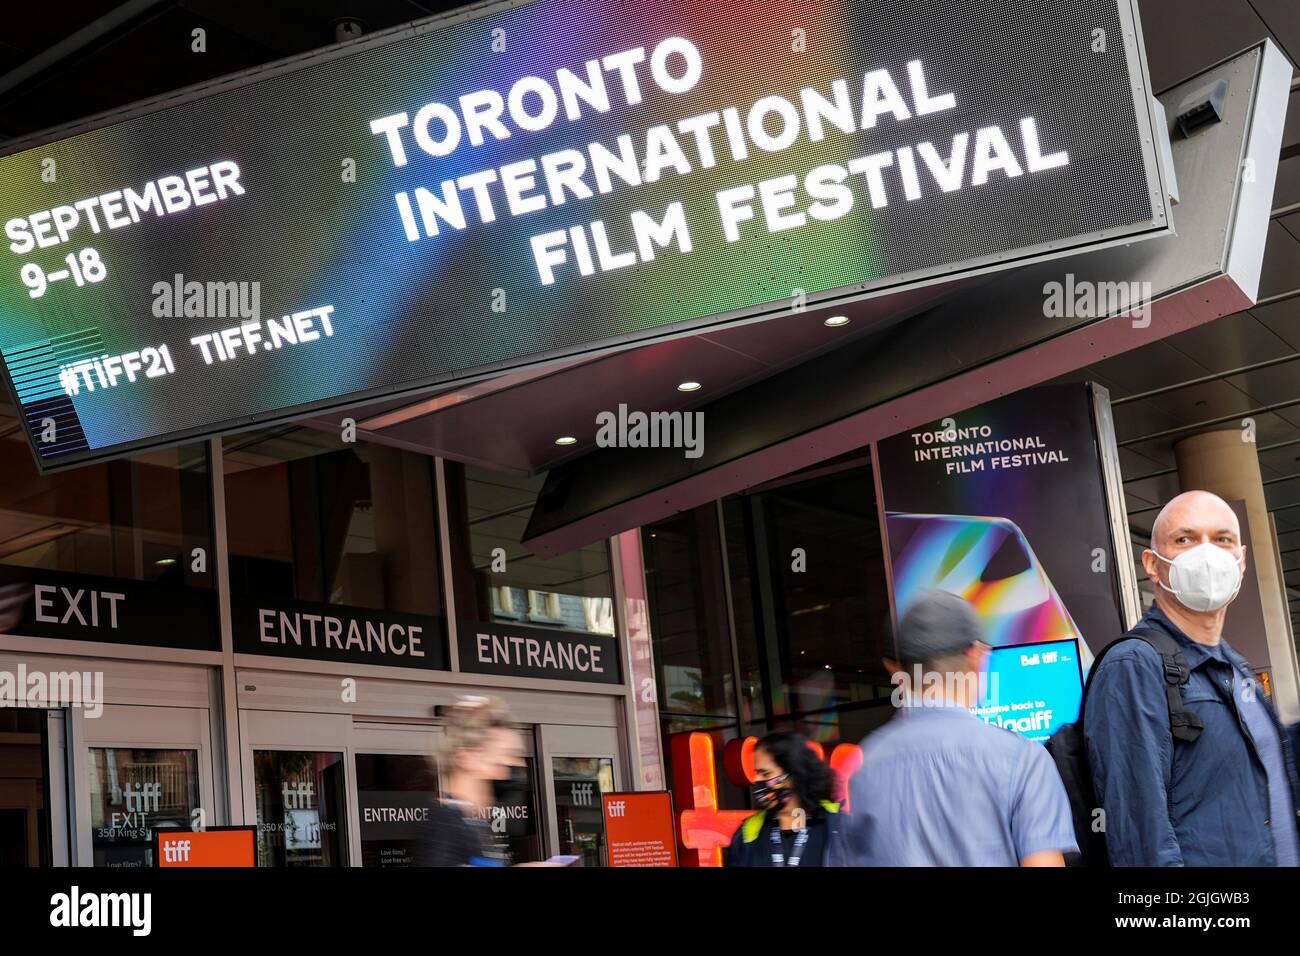 People are seen outside the TIFF Bell Lightbox building, headquarters of the Toronto International Film Festival (TIFF), in Toronto, Canada, September 9, 2021. REUTERS/Mark Blinch Stock Photo